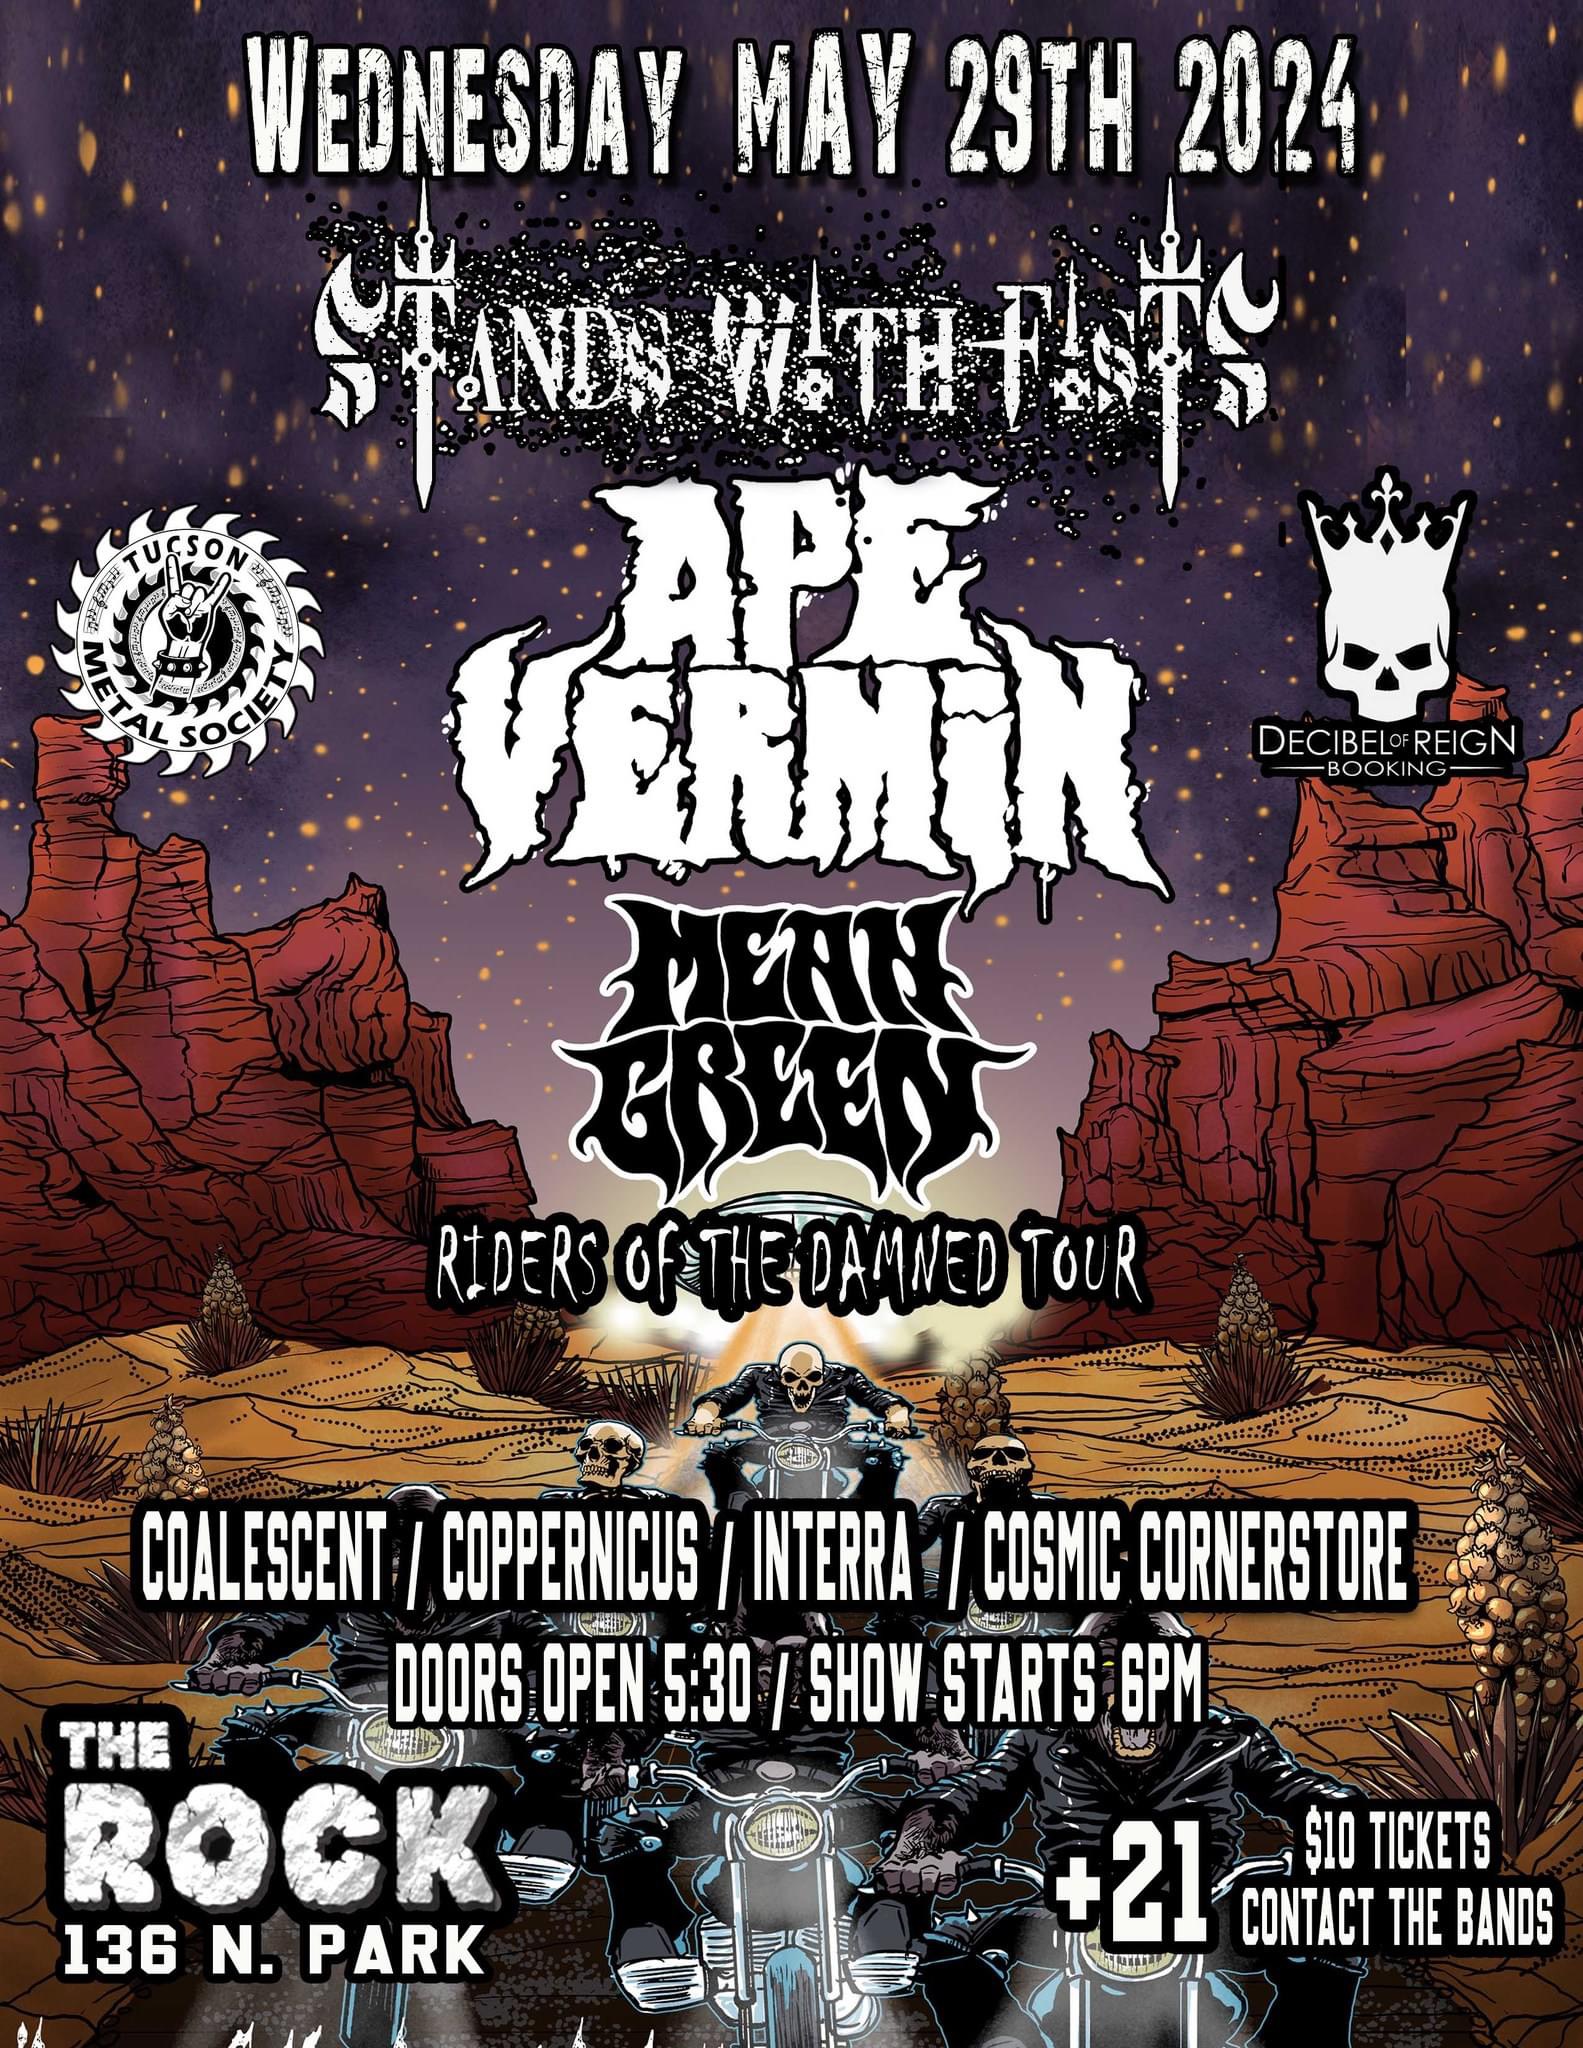 Riders Of The Damned Tour with Ape Vermin, Mean Green and Stands With Fists